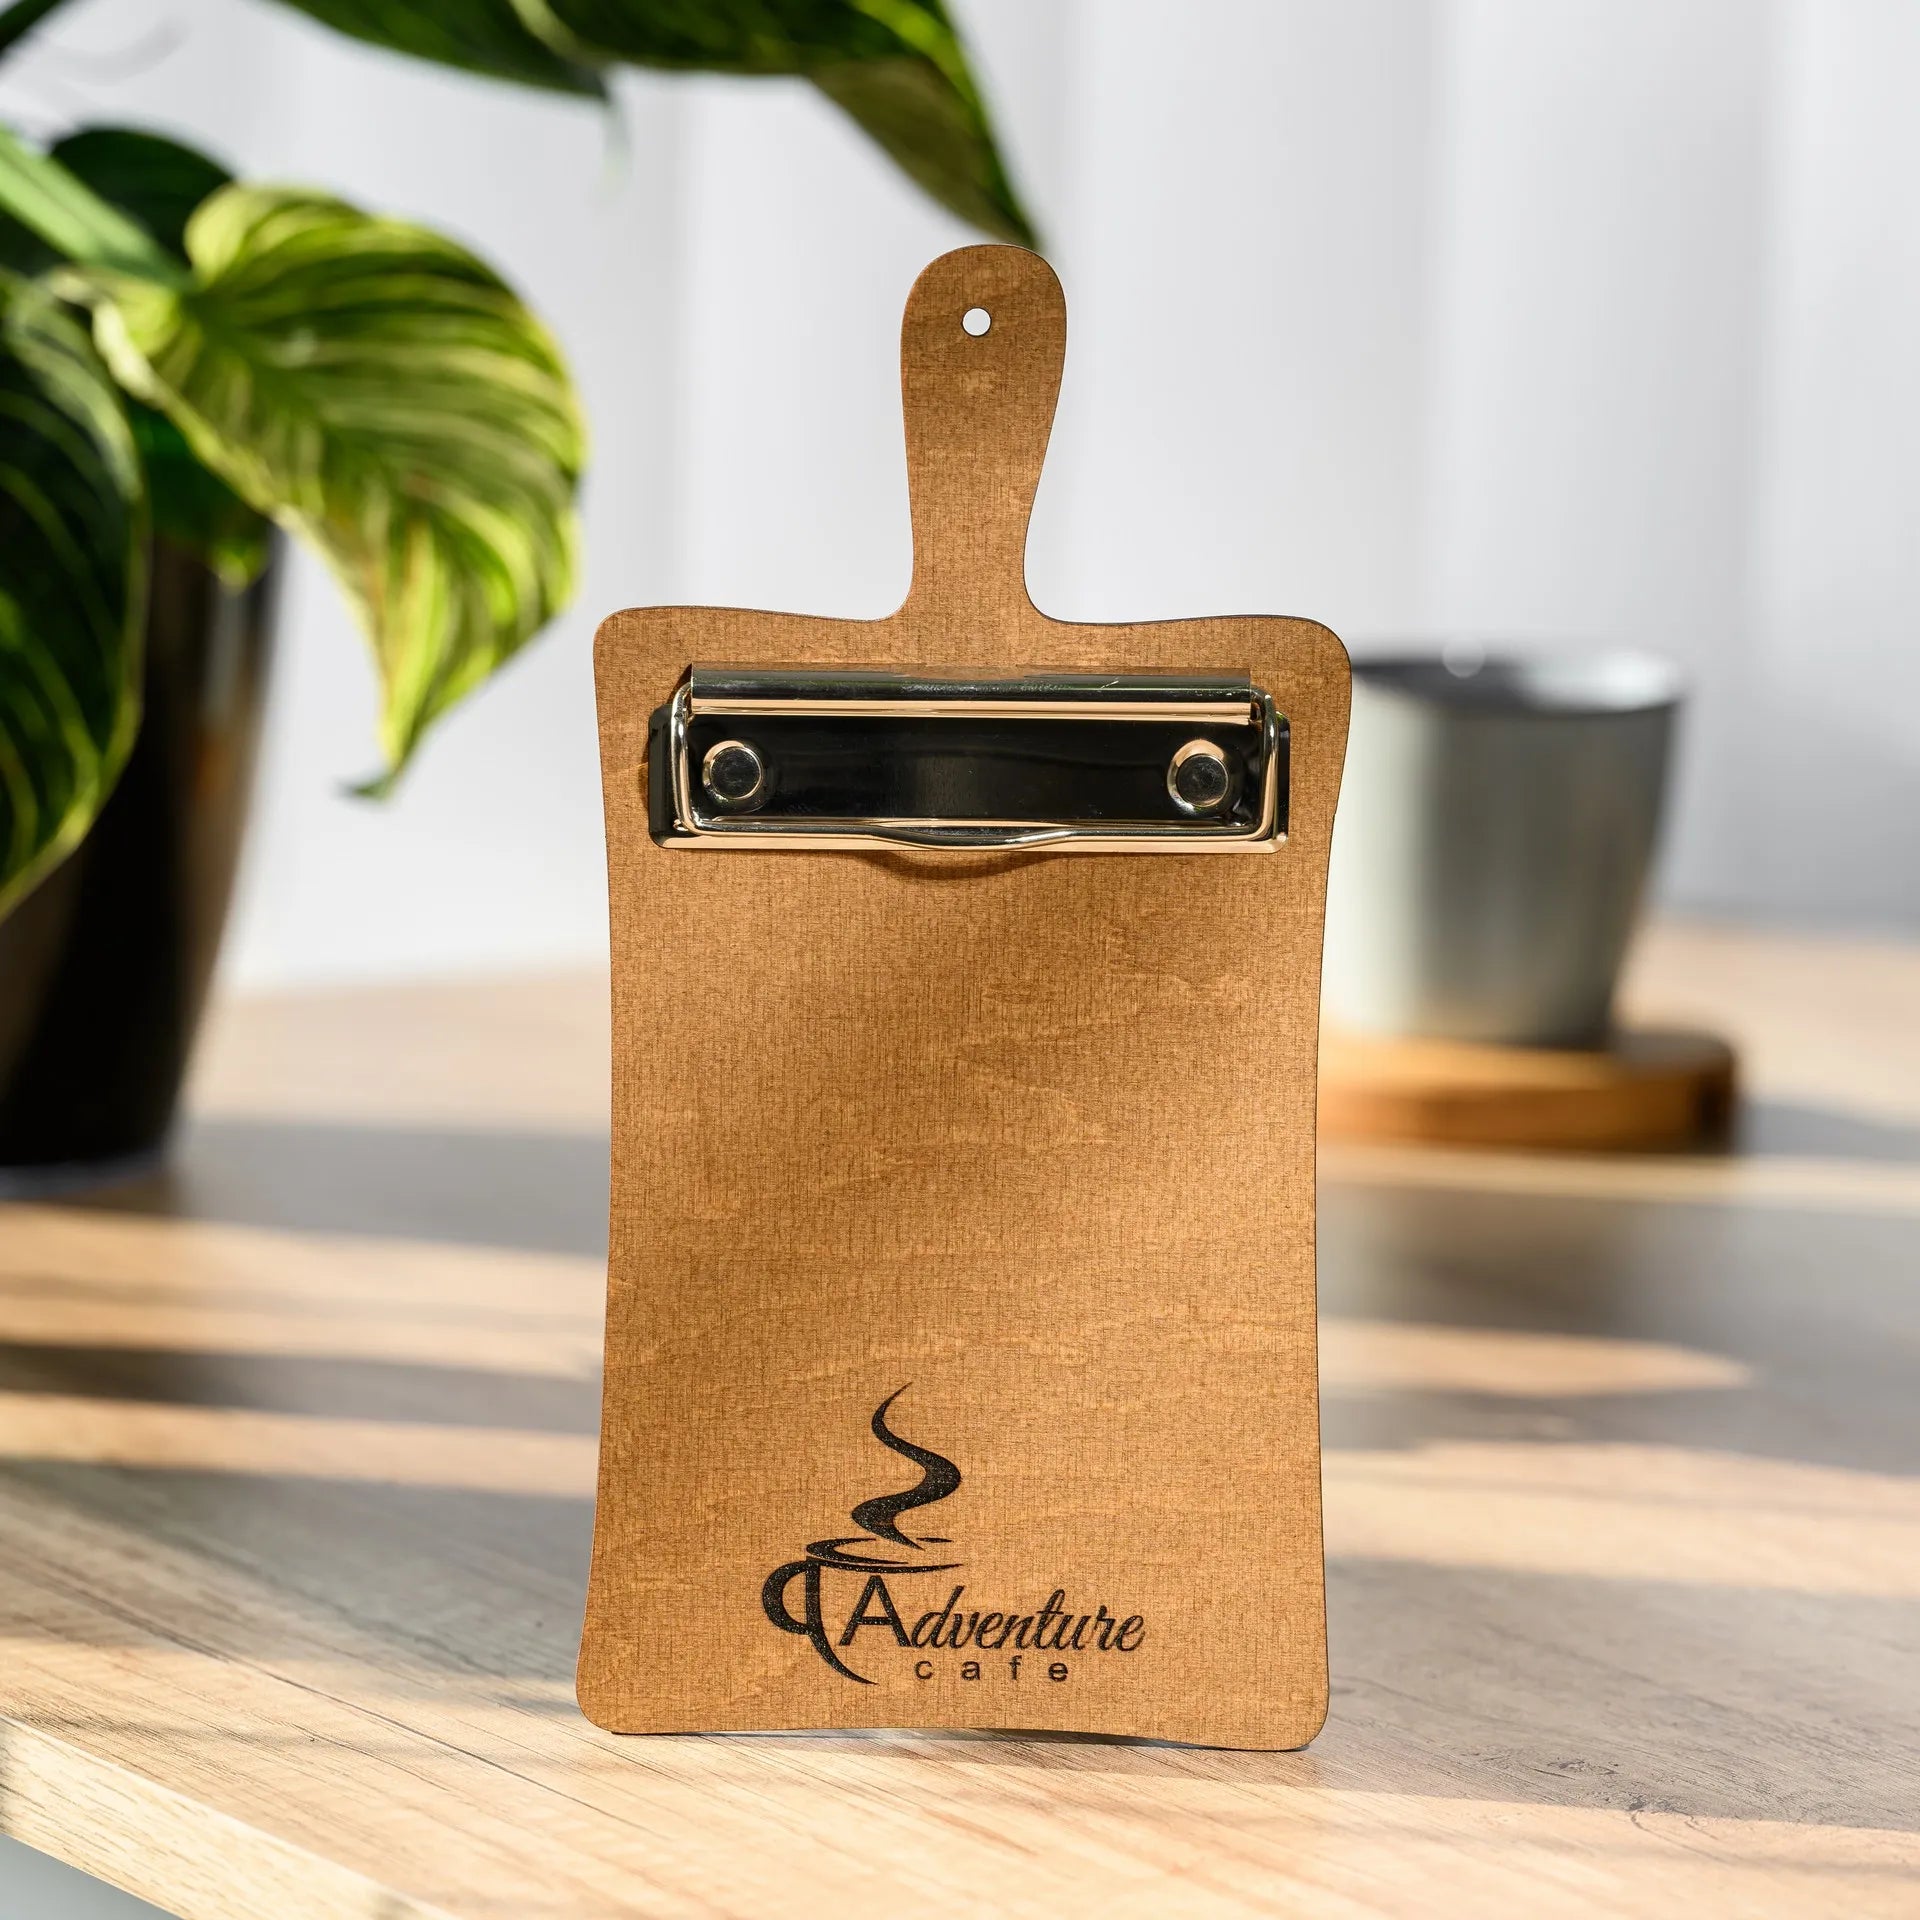 Wooden bill organizer with binder clip, perfect for restaurants; sleek design with logo engraving for a professional touch.